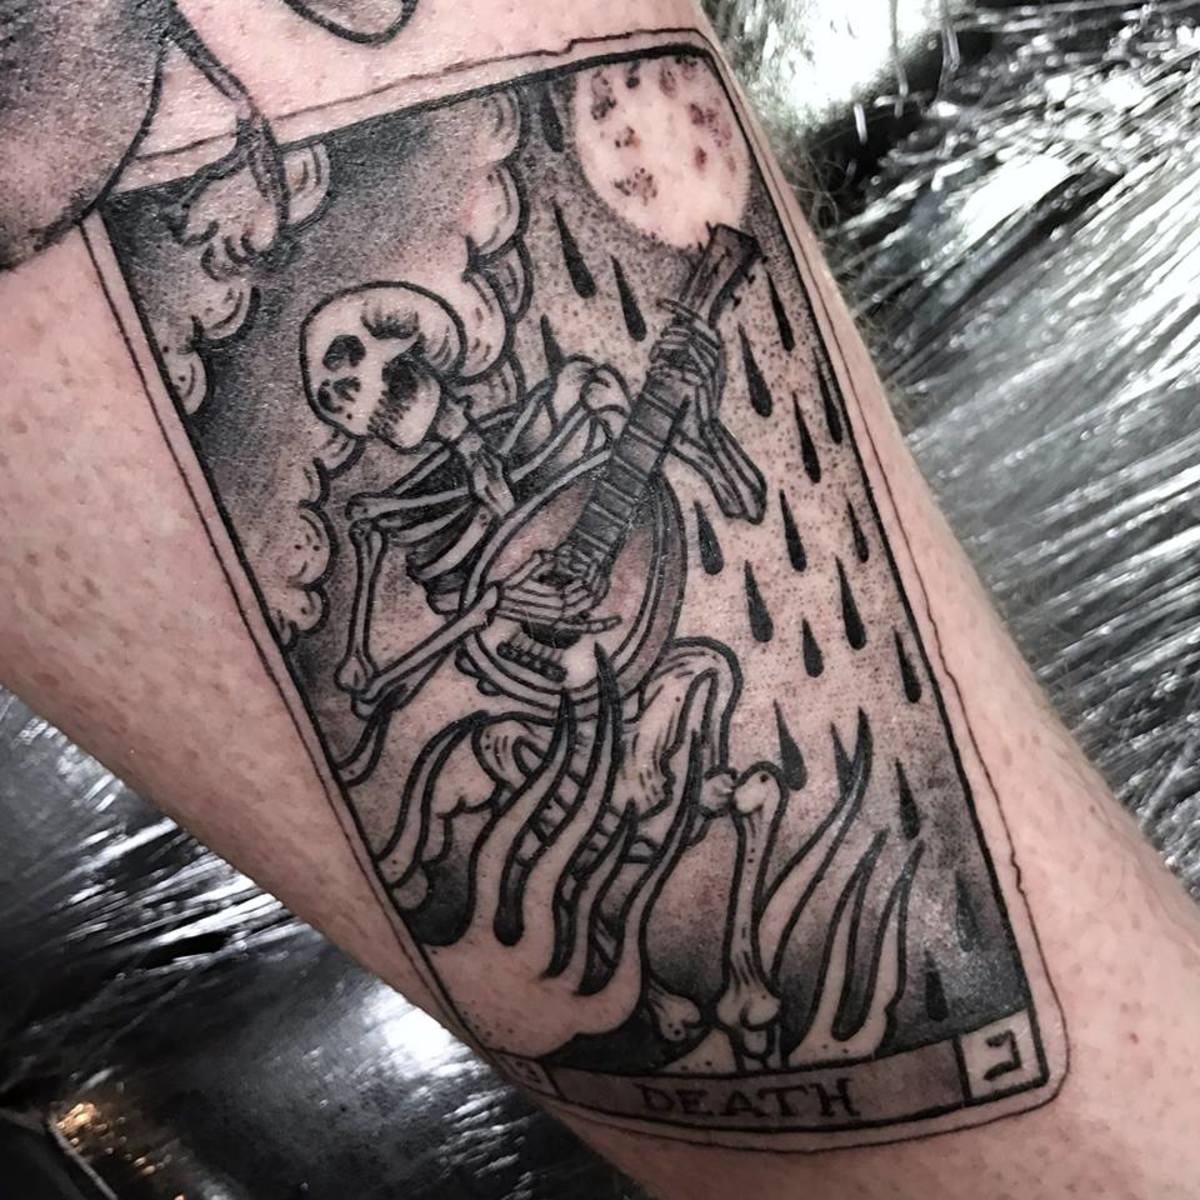 'Come join the murder’ Death tarot tattoo by Hash at Northsidetattooz.